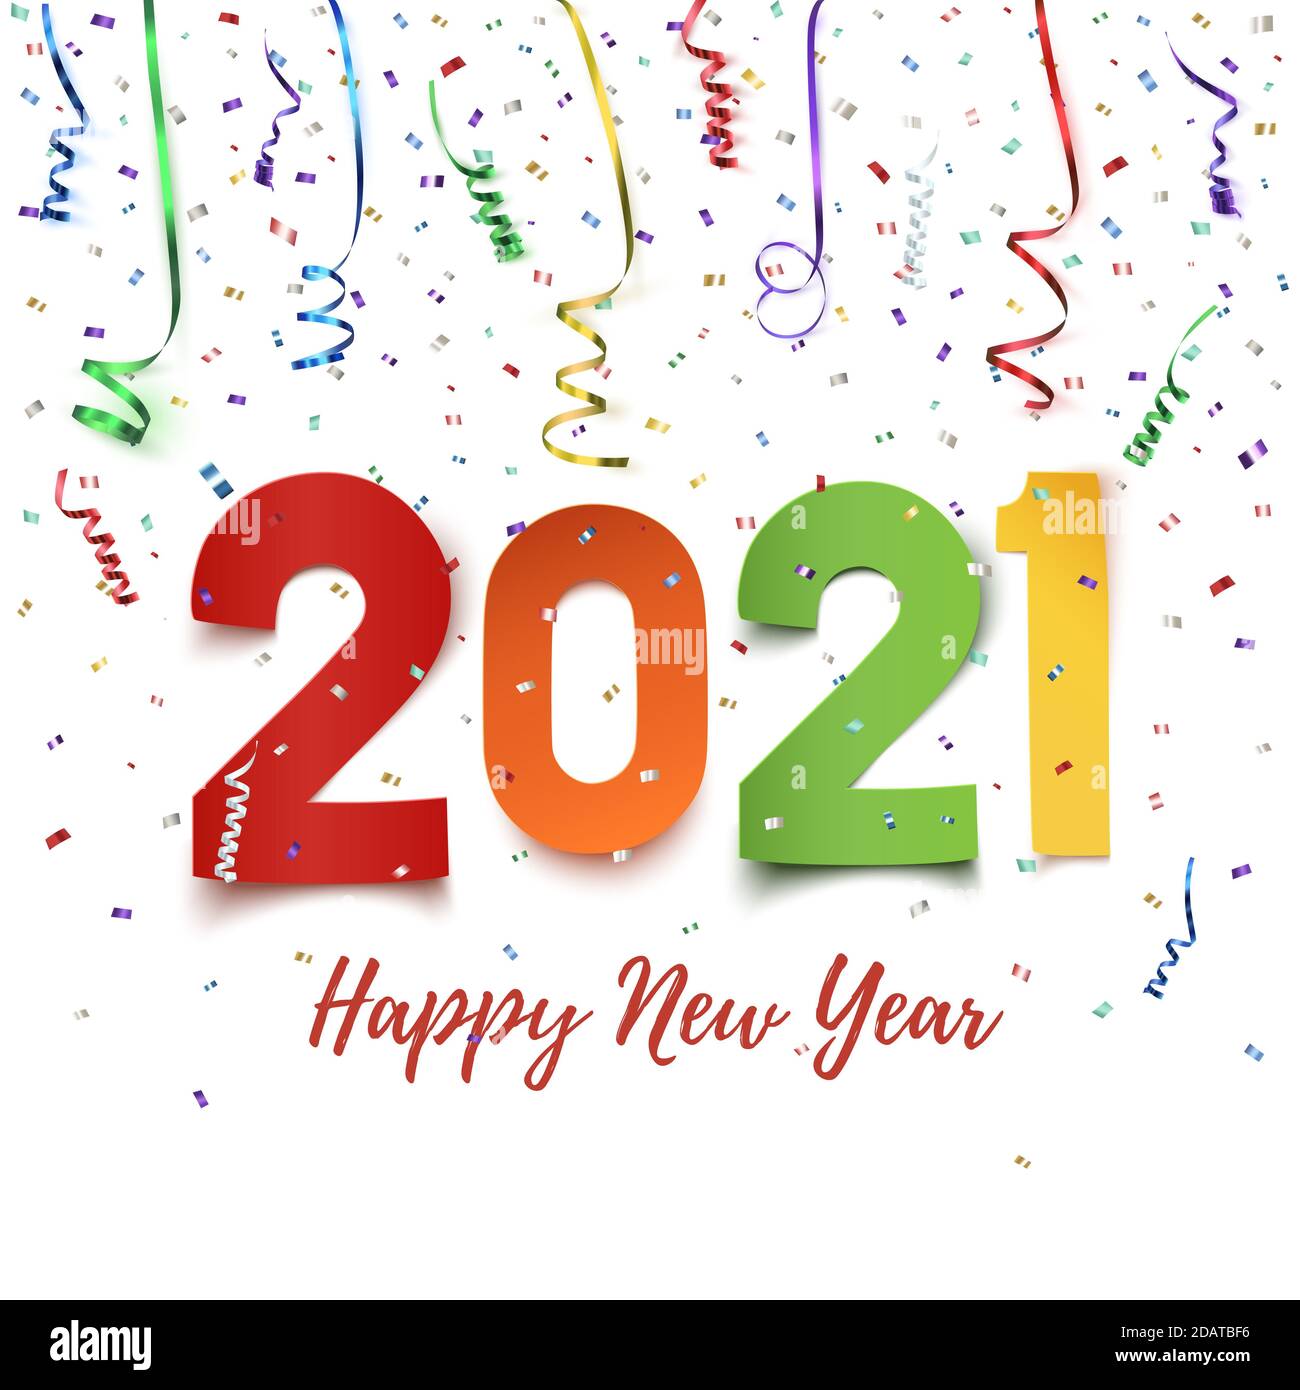 Happy New Year 2021. Colorful paper abstract design, background with ribbons and confetti on white. Greeting card template. Vector illustration. Stock Photo